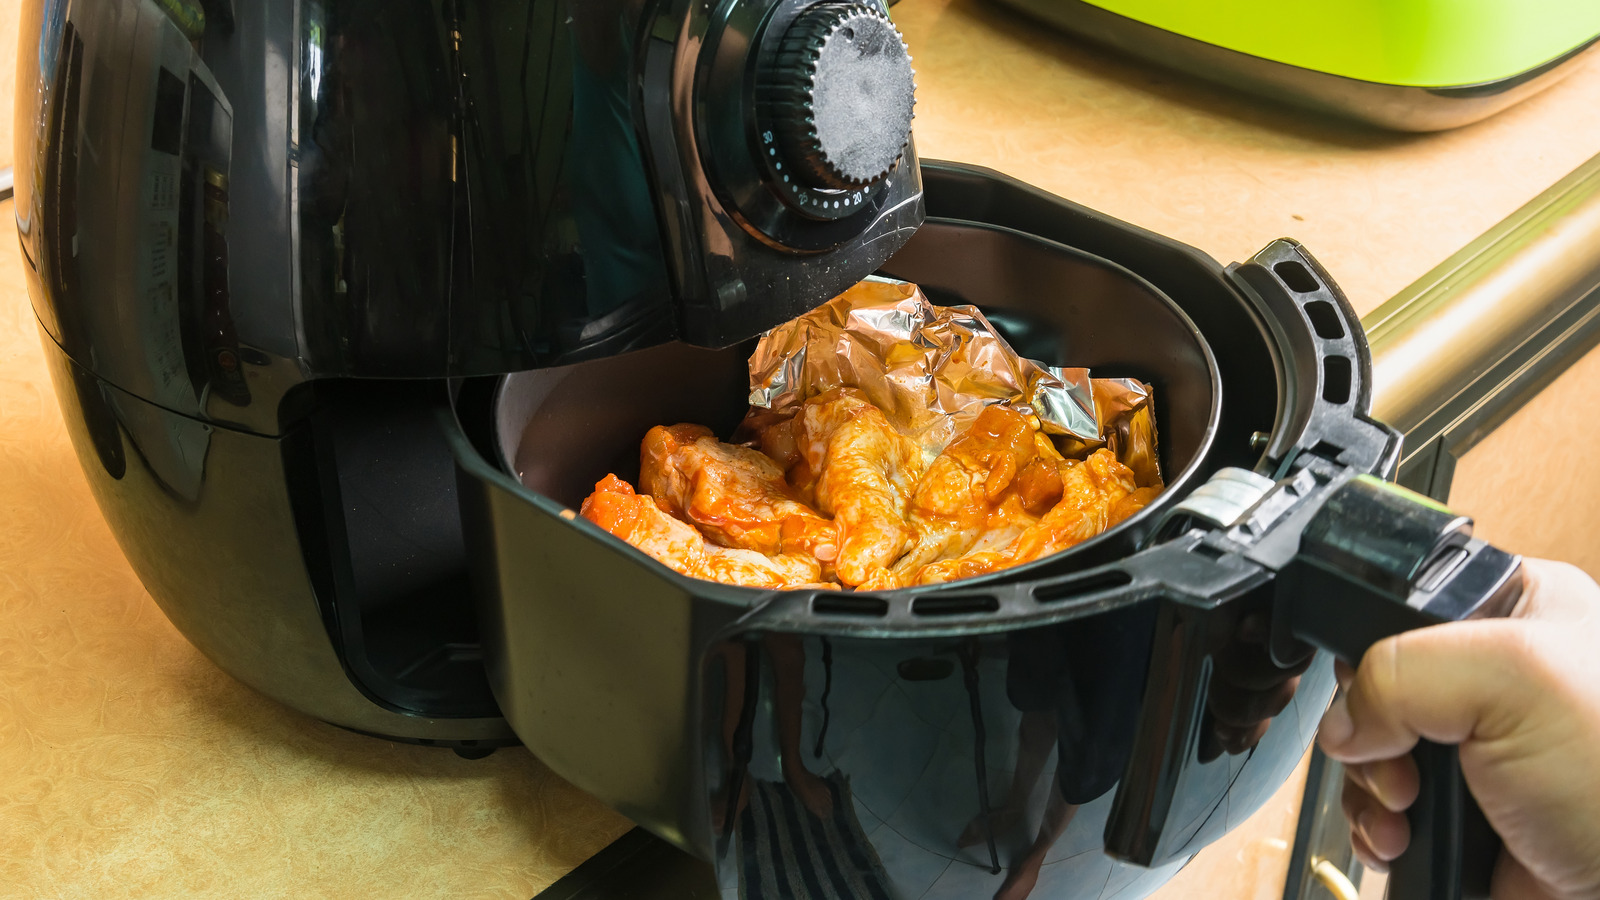 https://www.mashed.com/img/gallery/how-the-first-air-fryer-was-invented/l-intro-1632334544.jpg